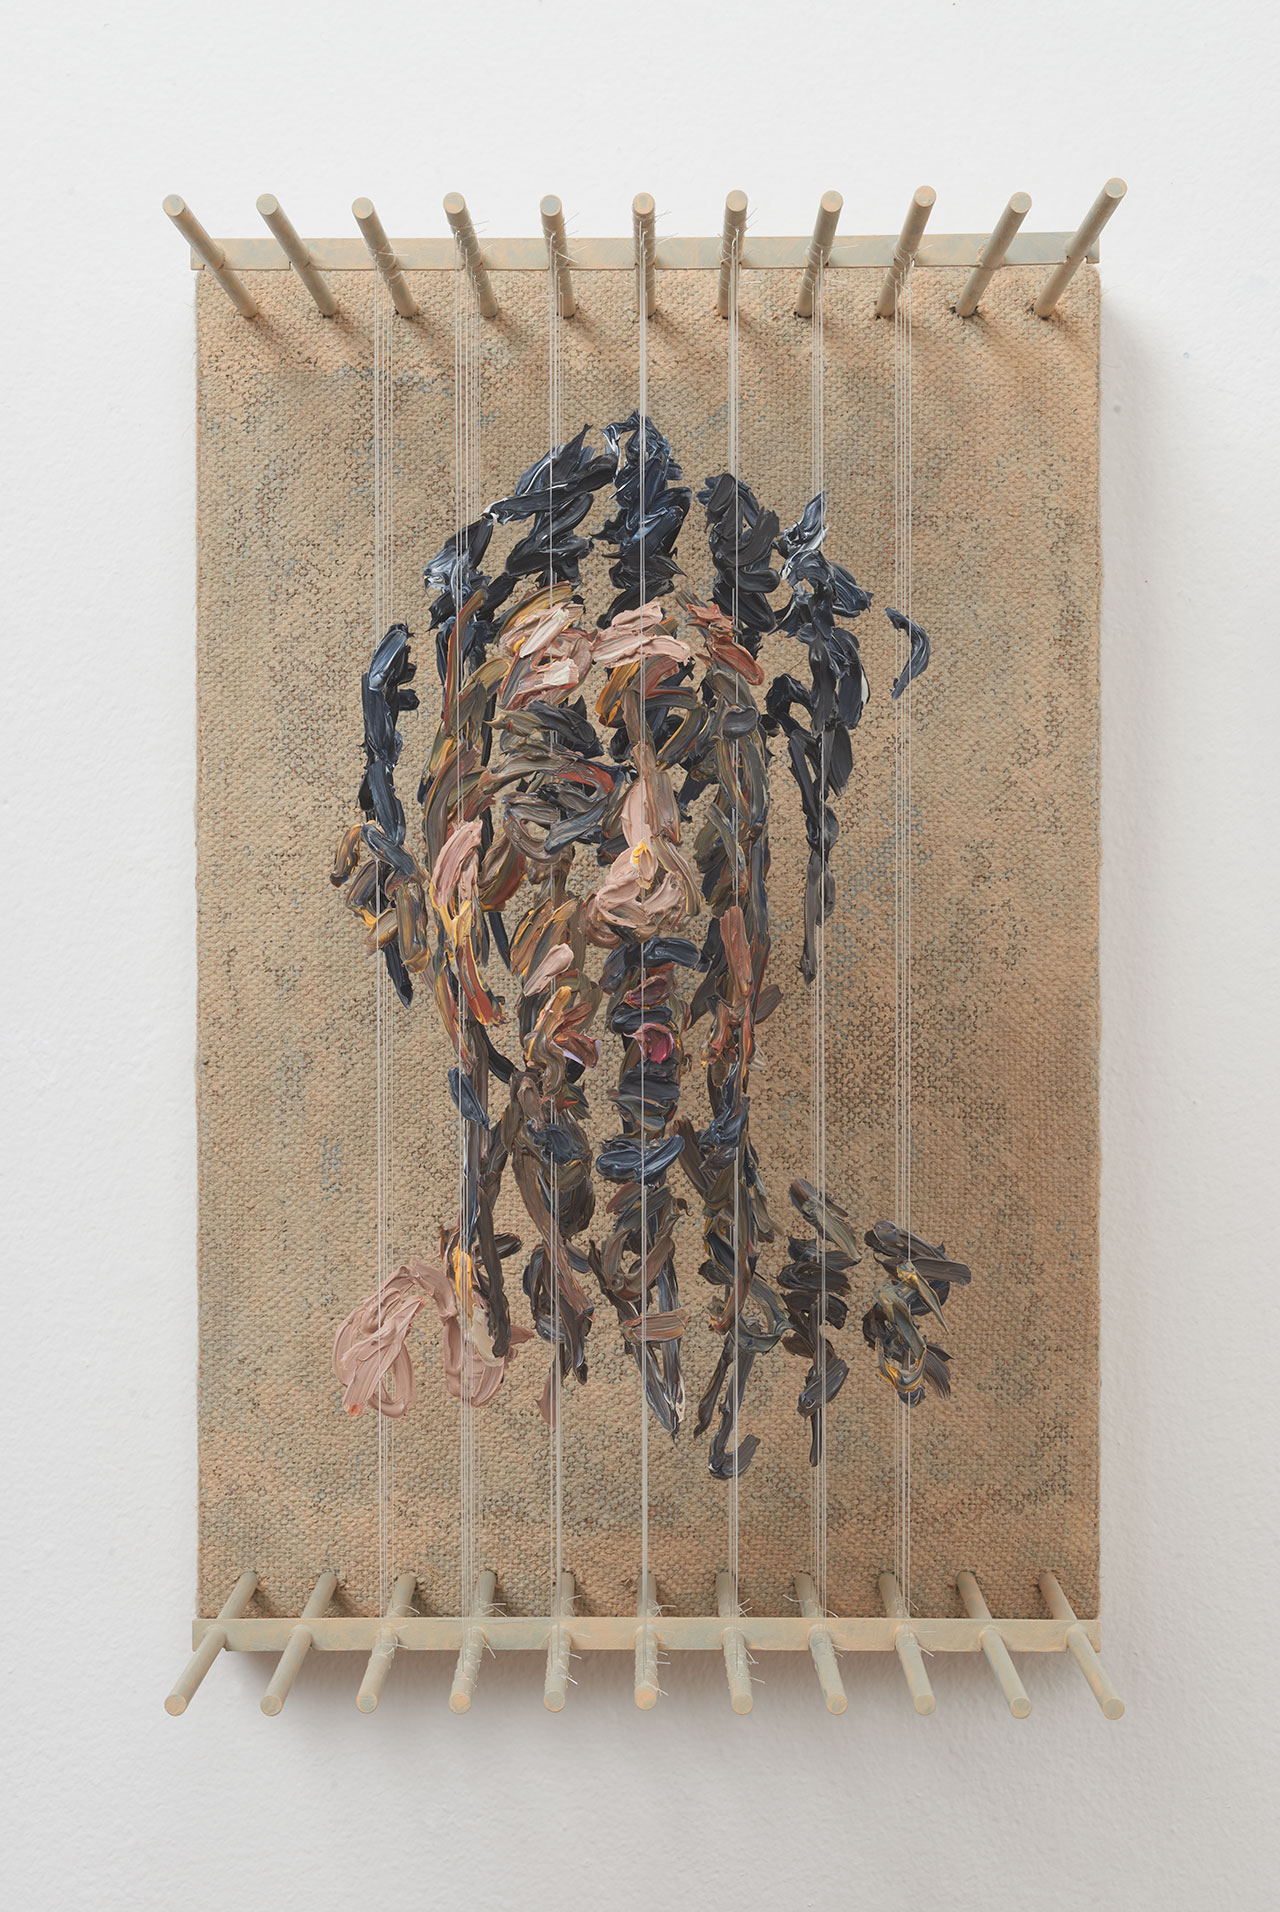 Chris Dorosz, s.r.o, 2017. Acrylic paint on monofilament, metal, jute on board ,14 H x 9.25 W x 11D inches. Photo courtesy of Muriel Guépin and the artist.